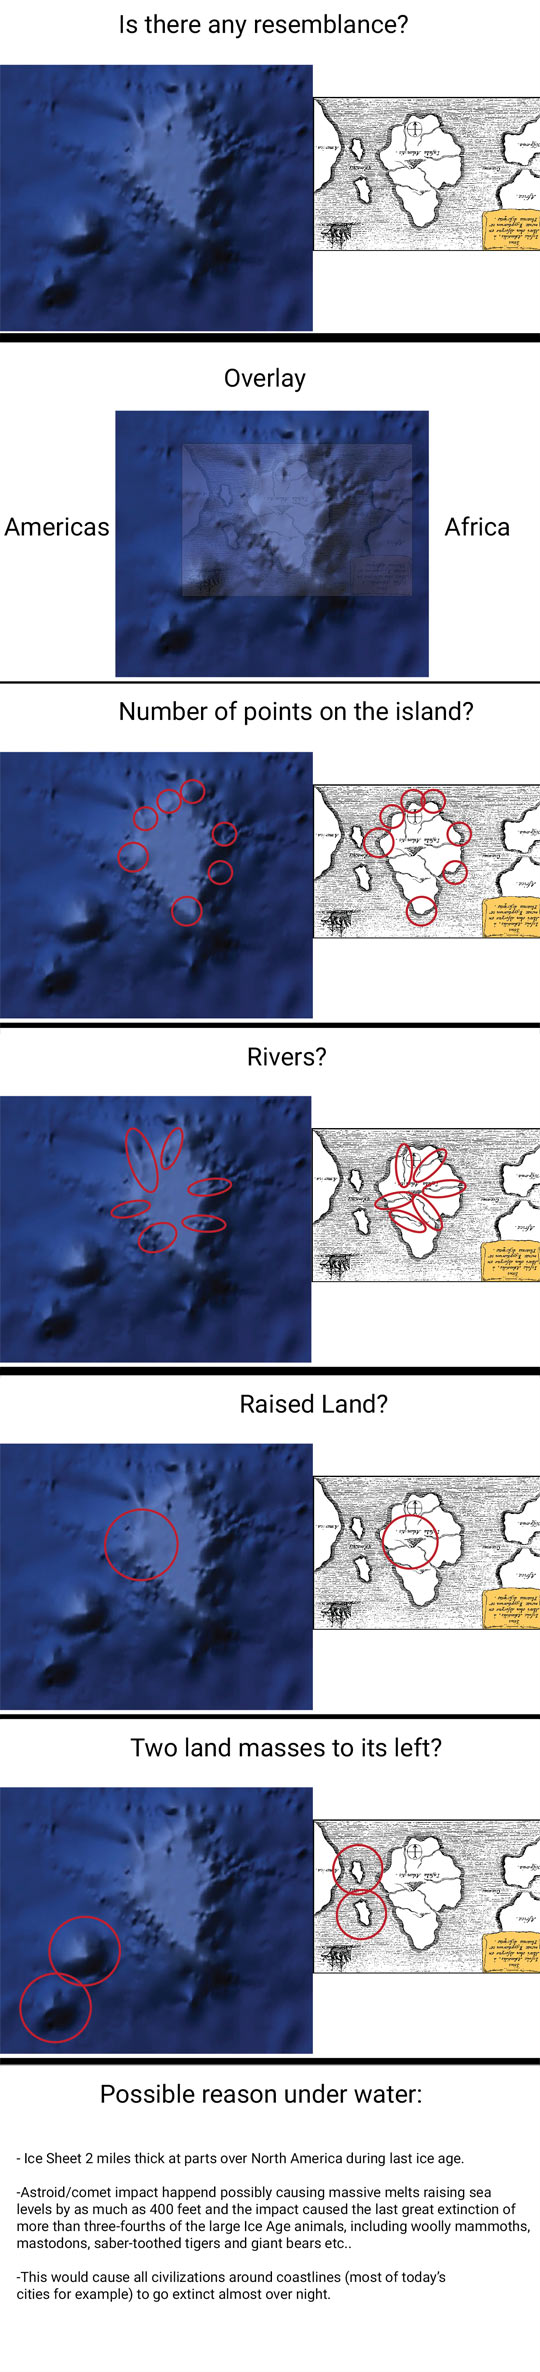 funny-Atlantis-island-maps-search-proves-resemblance